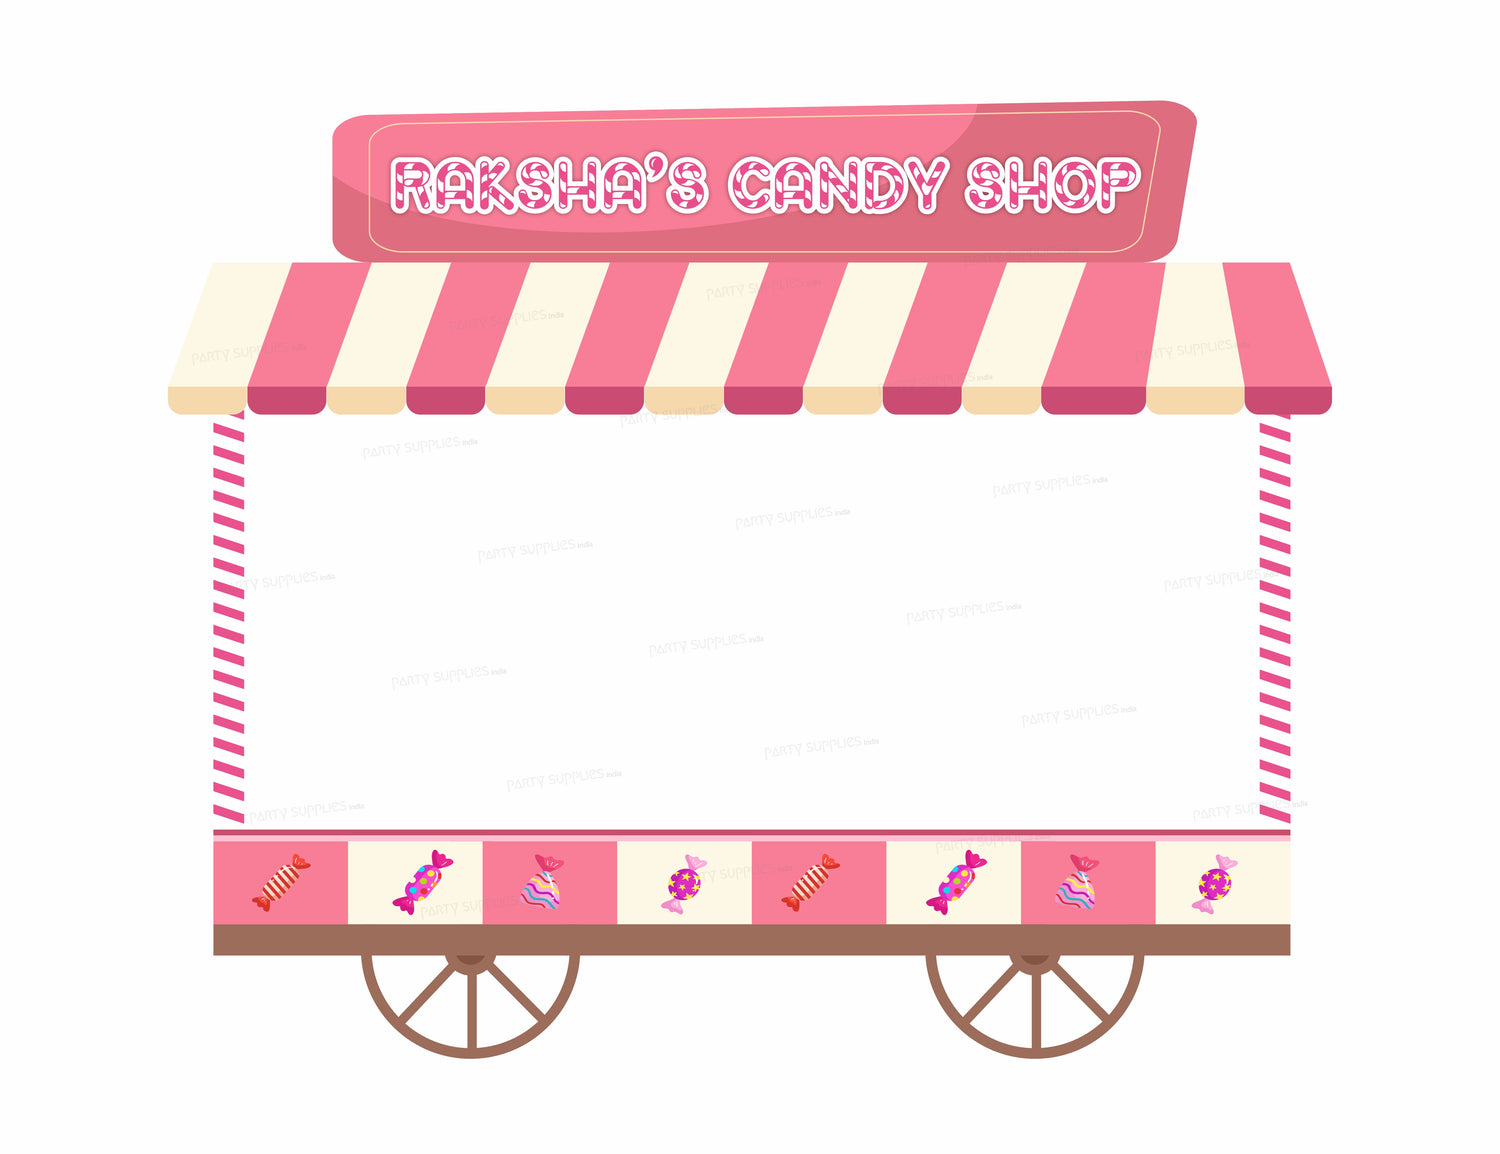 PSI Candy Shop on Wheels Theme Photobooth